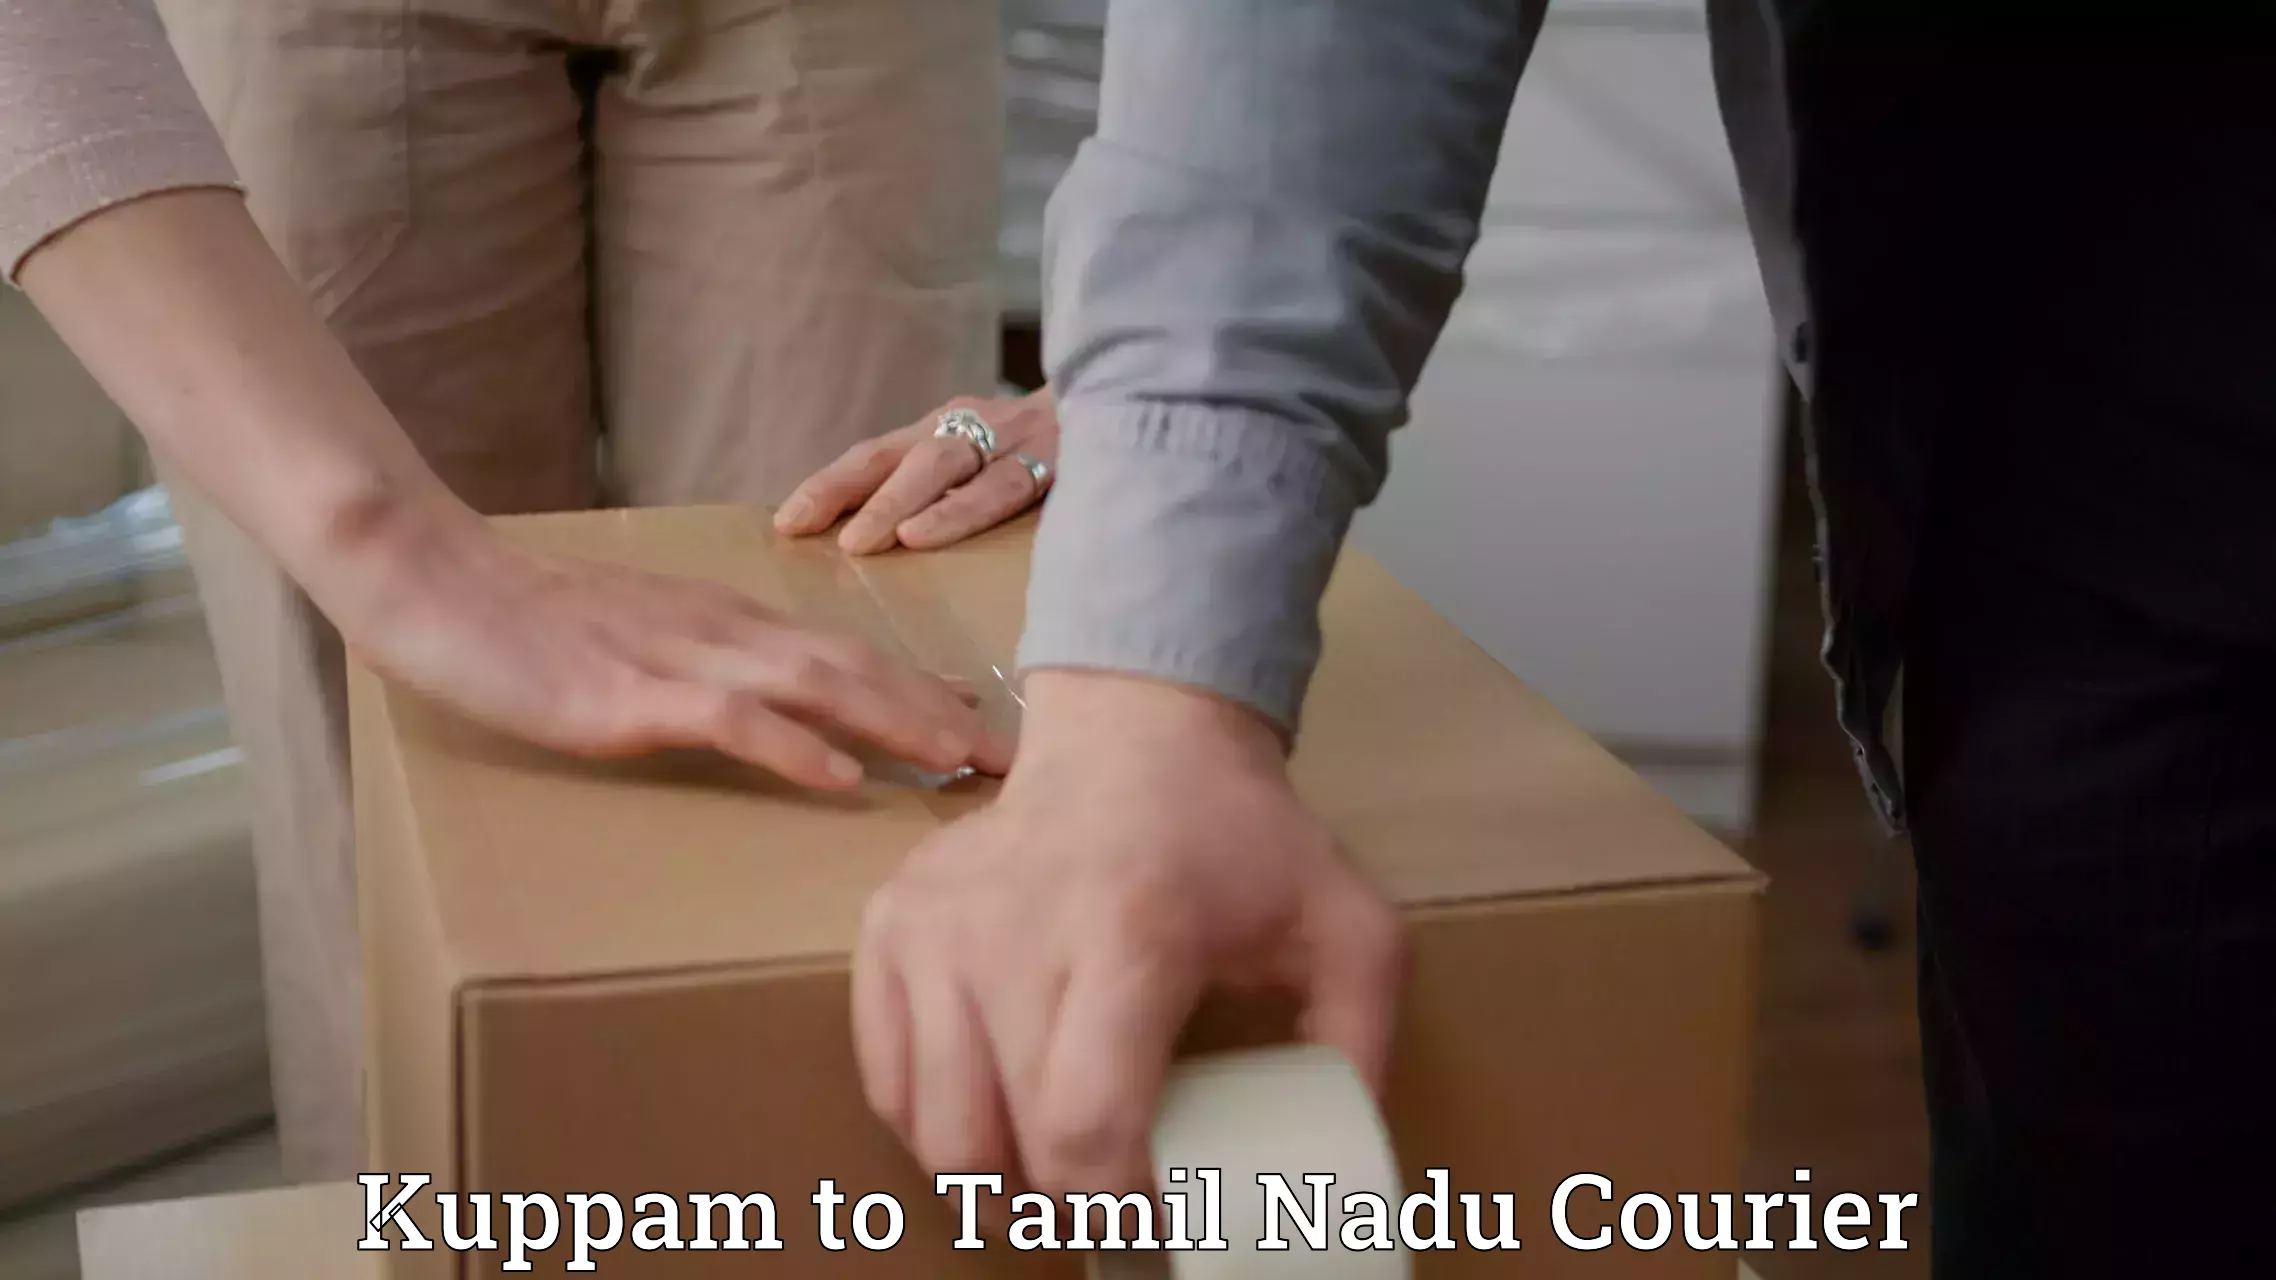 Quick courier services Kuppam to Melmaruvathur